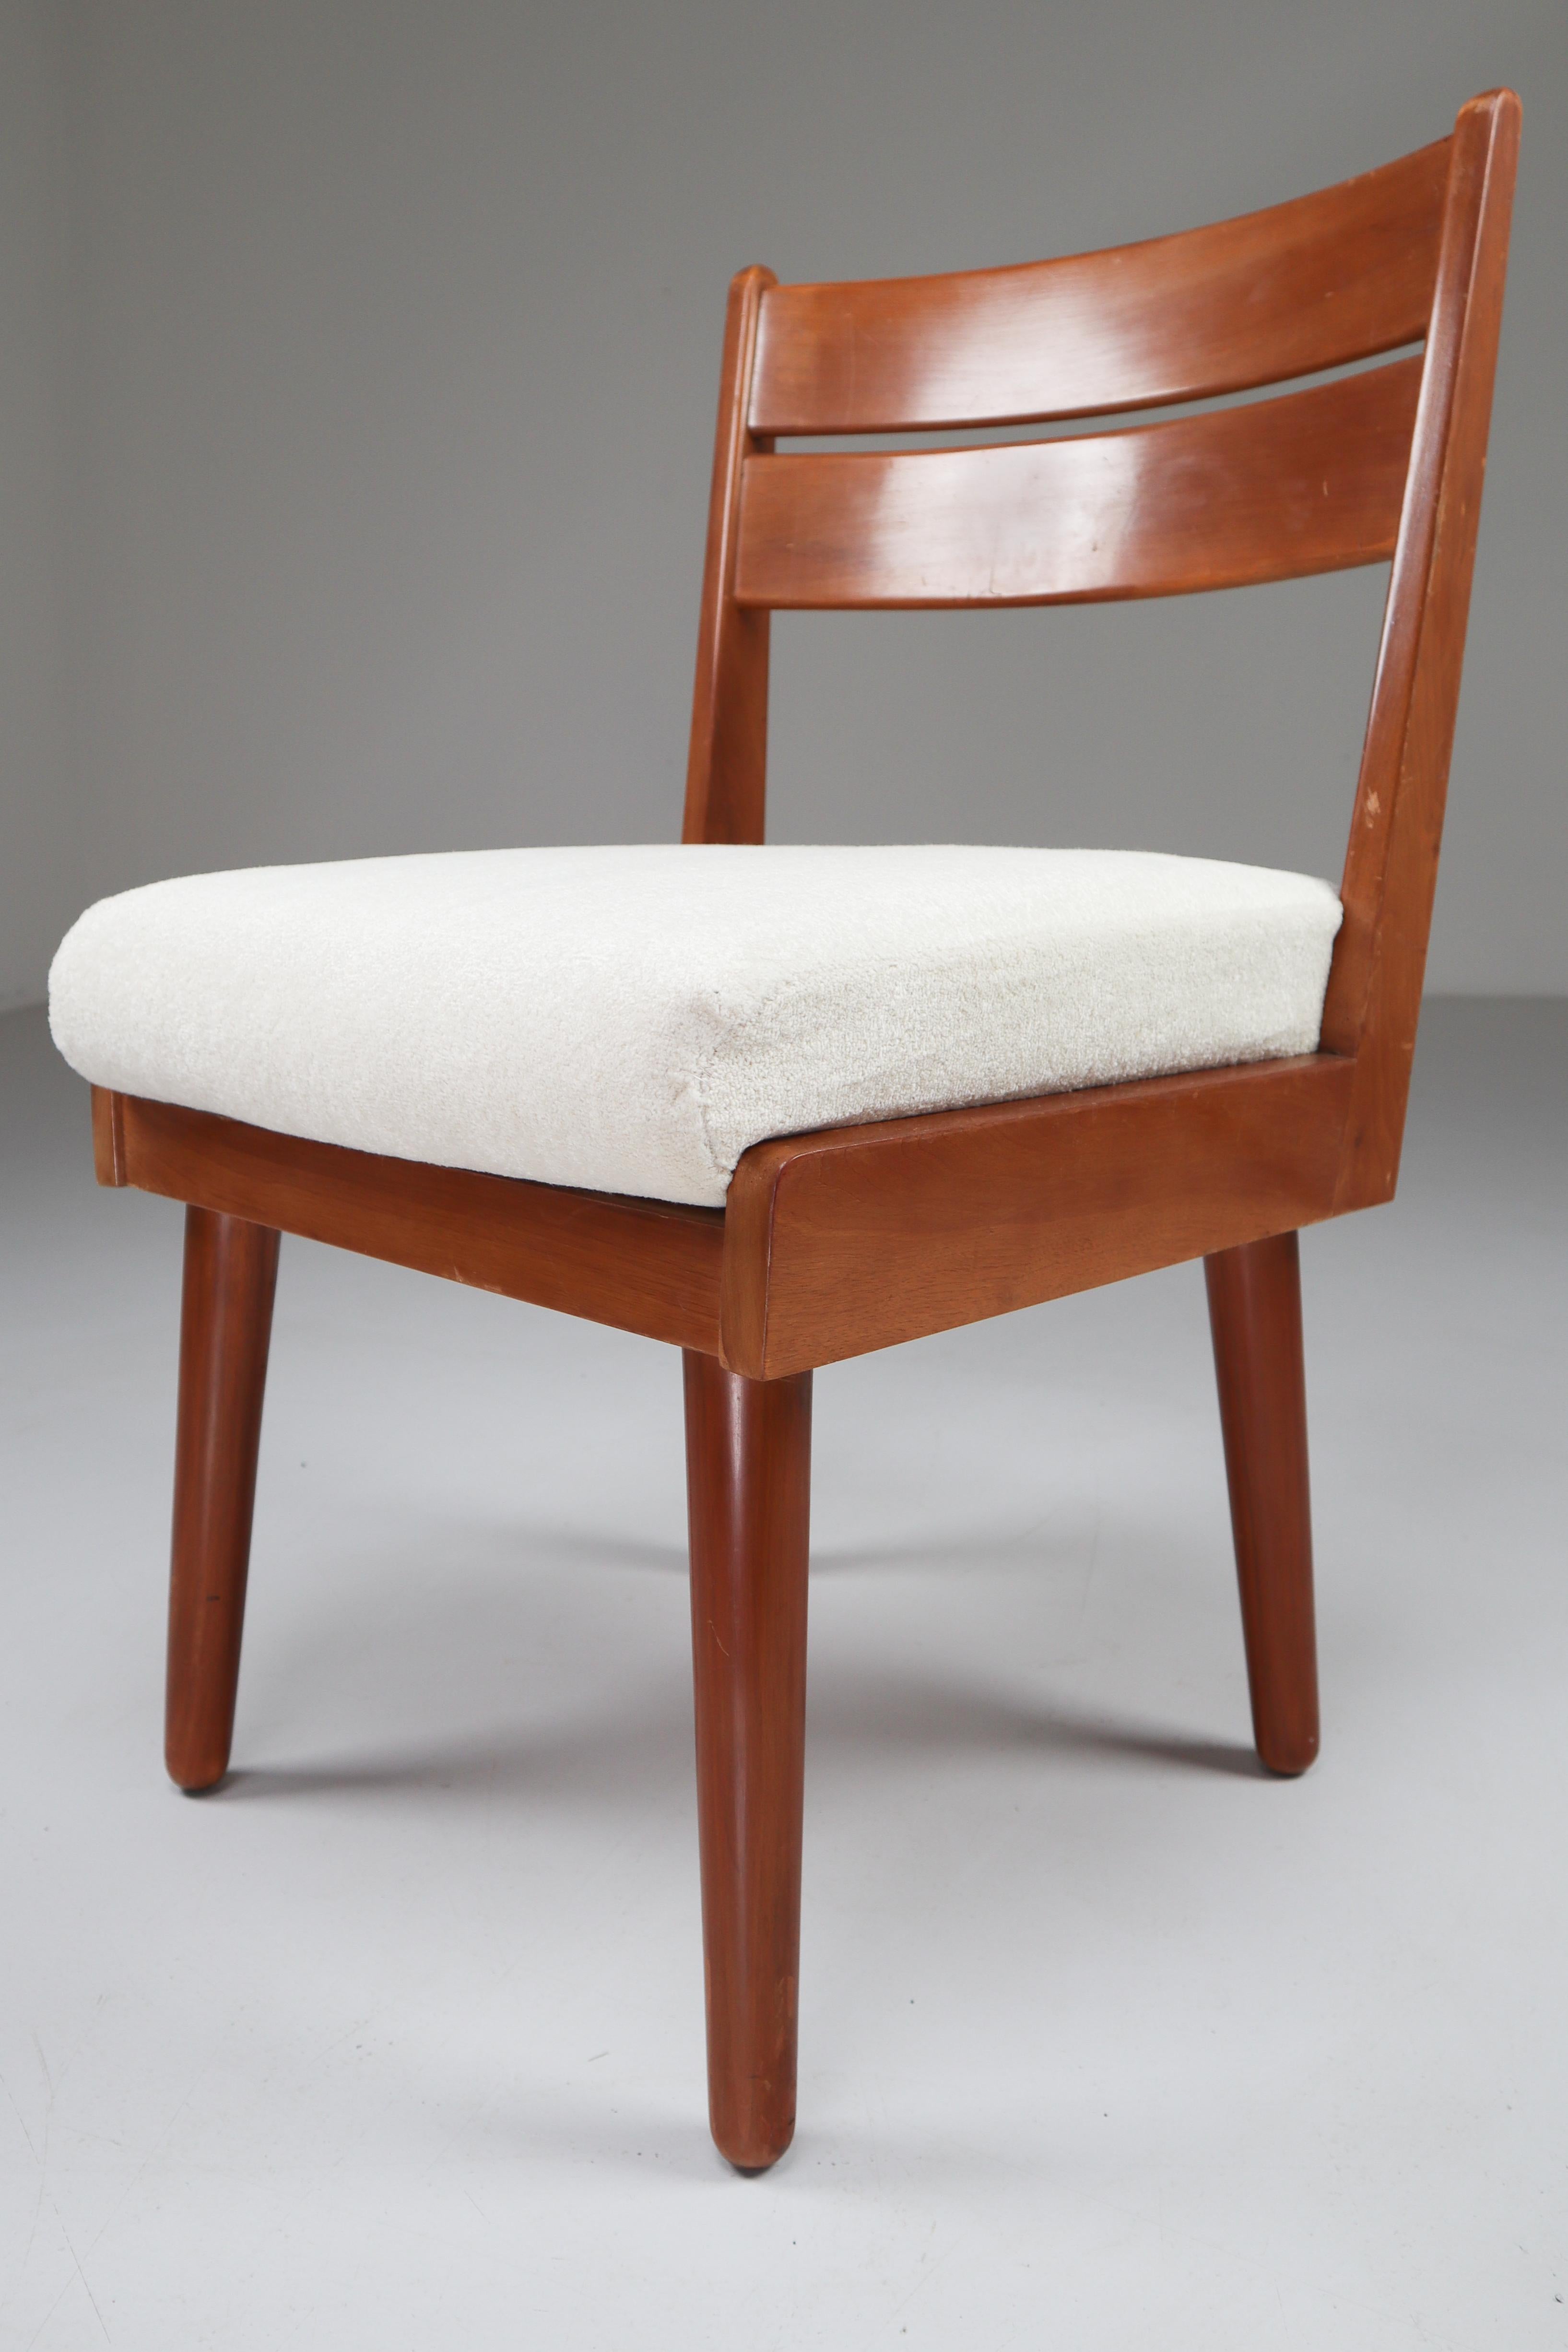 Mid-20th Century Midcentury French Chair in Walnut and Wool Fabric, 1950s